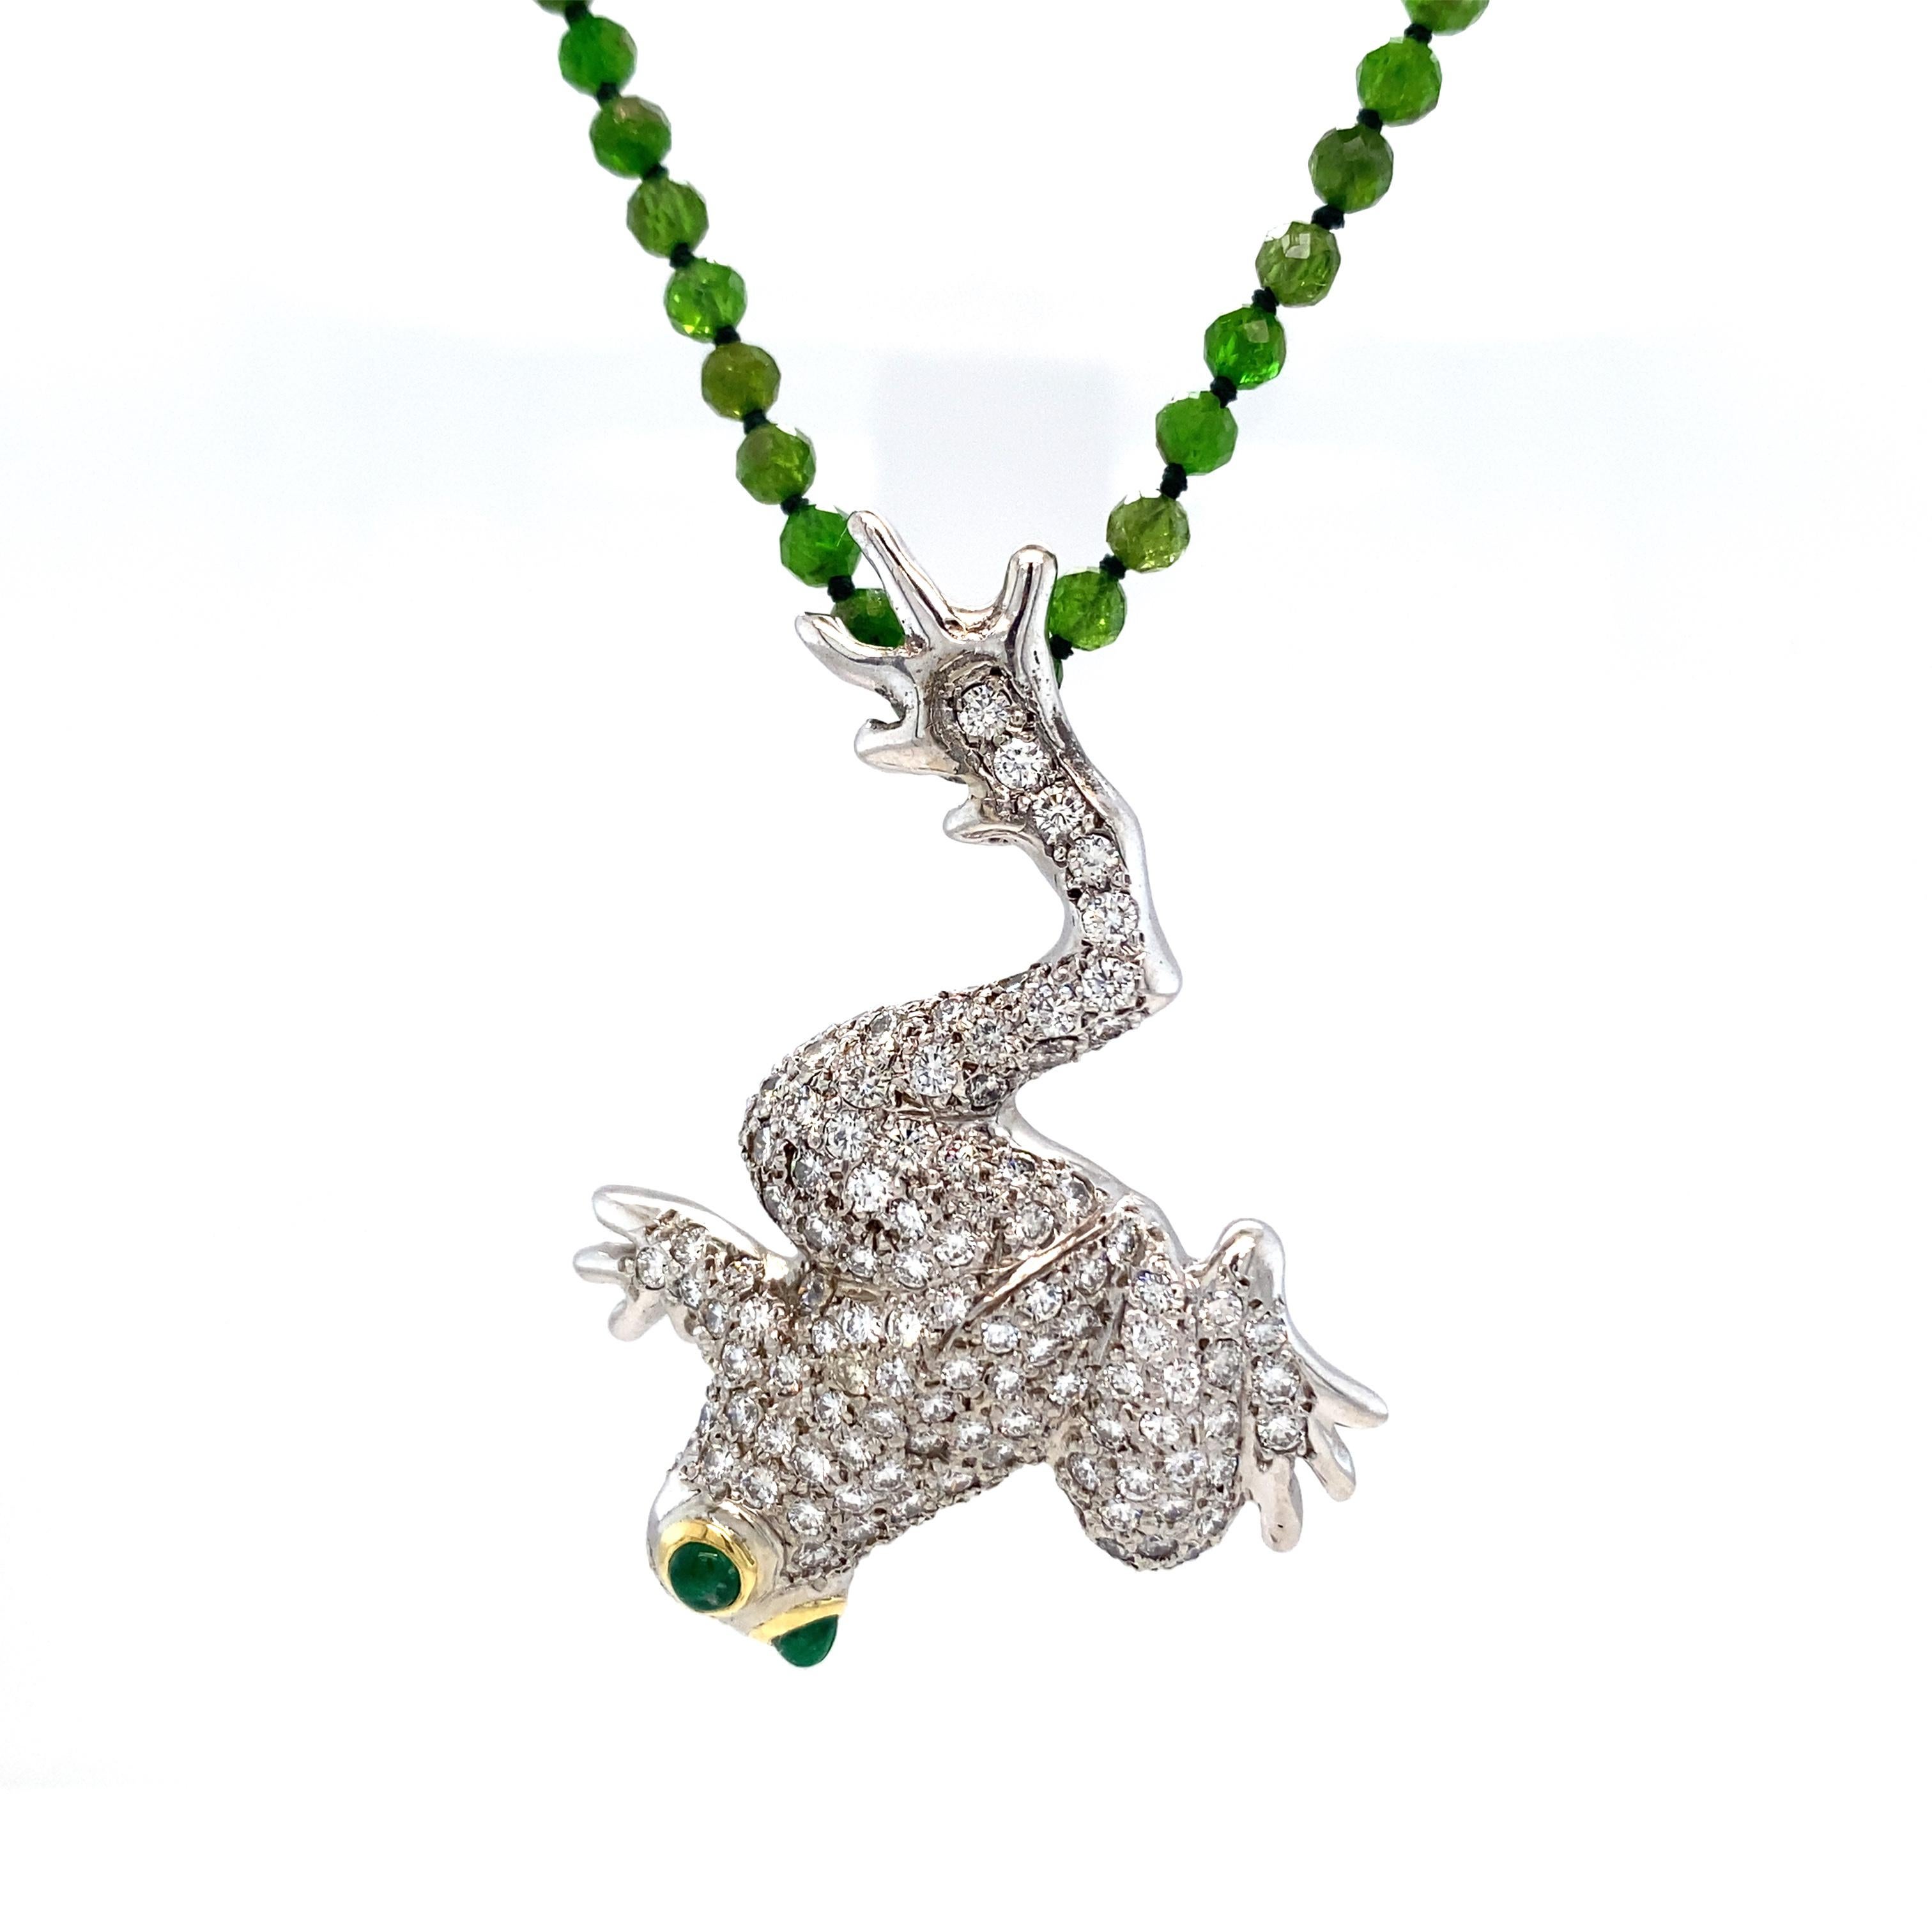 This is a custom design made in 1998 by San Diego jeweler Lawrence Poon.  When he hopped into our lives, this frog was a pin, but The Boss felt he would make a cool pendant, especially with double bales so that you can wear him diving into your